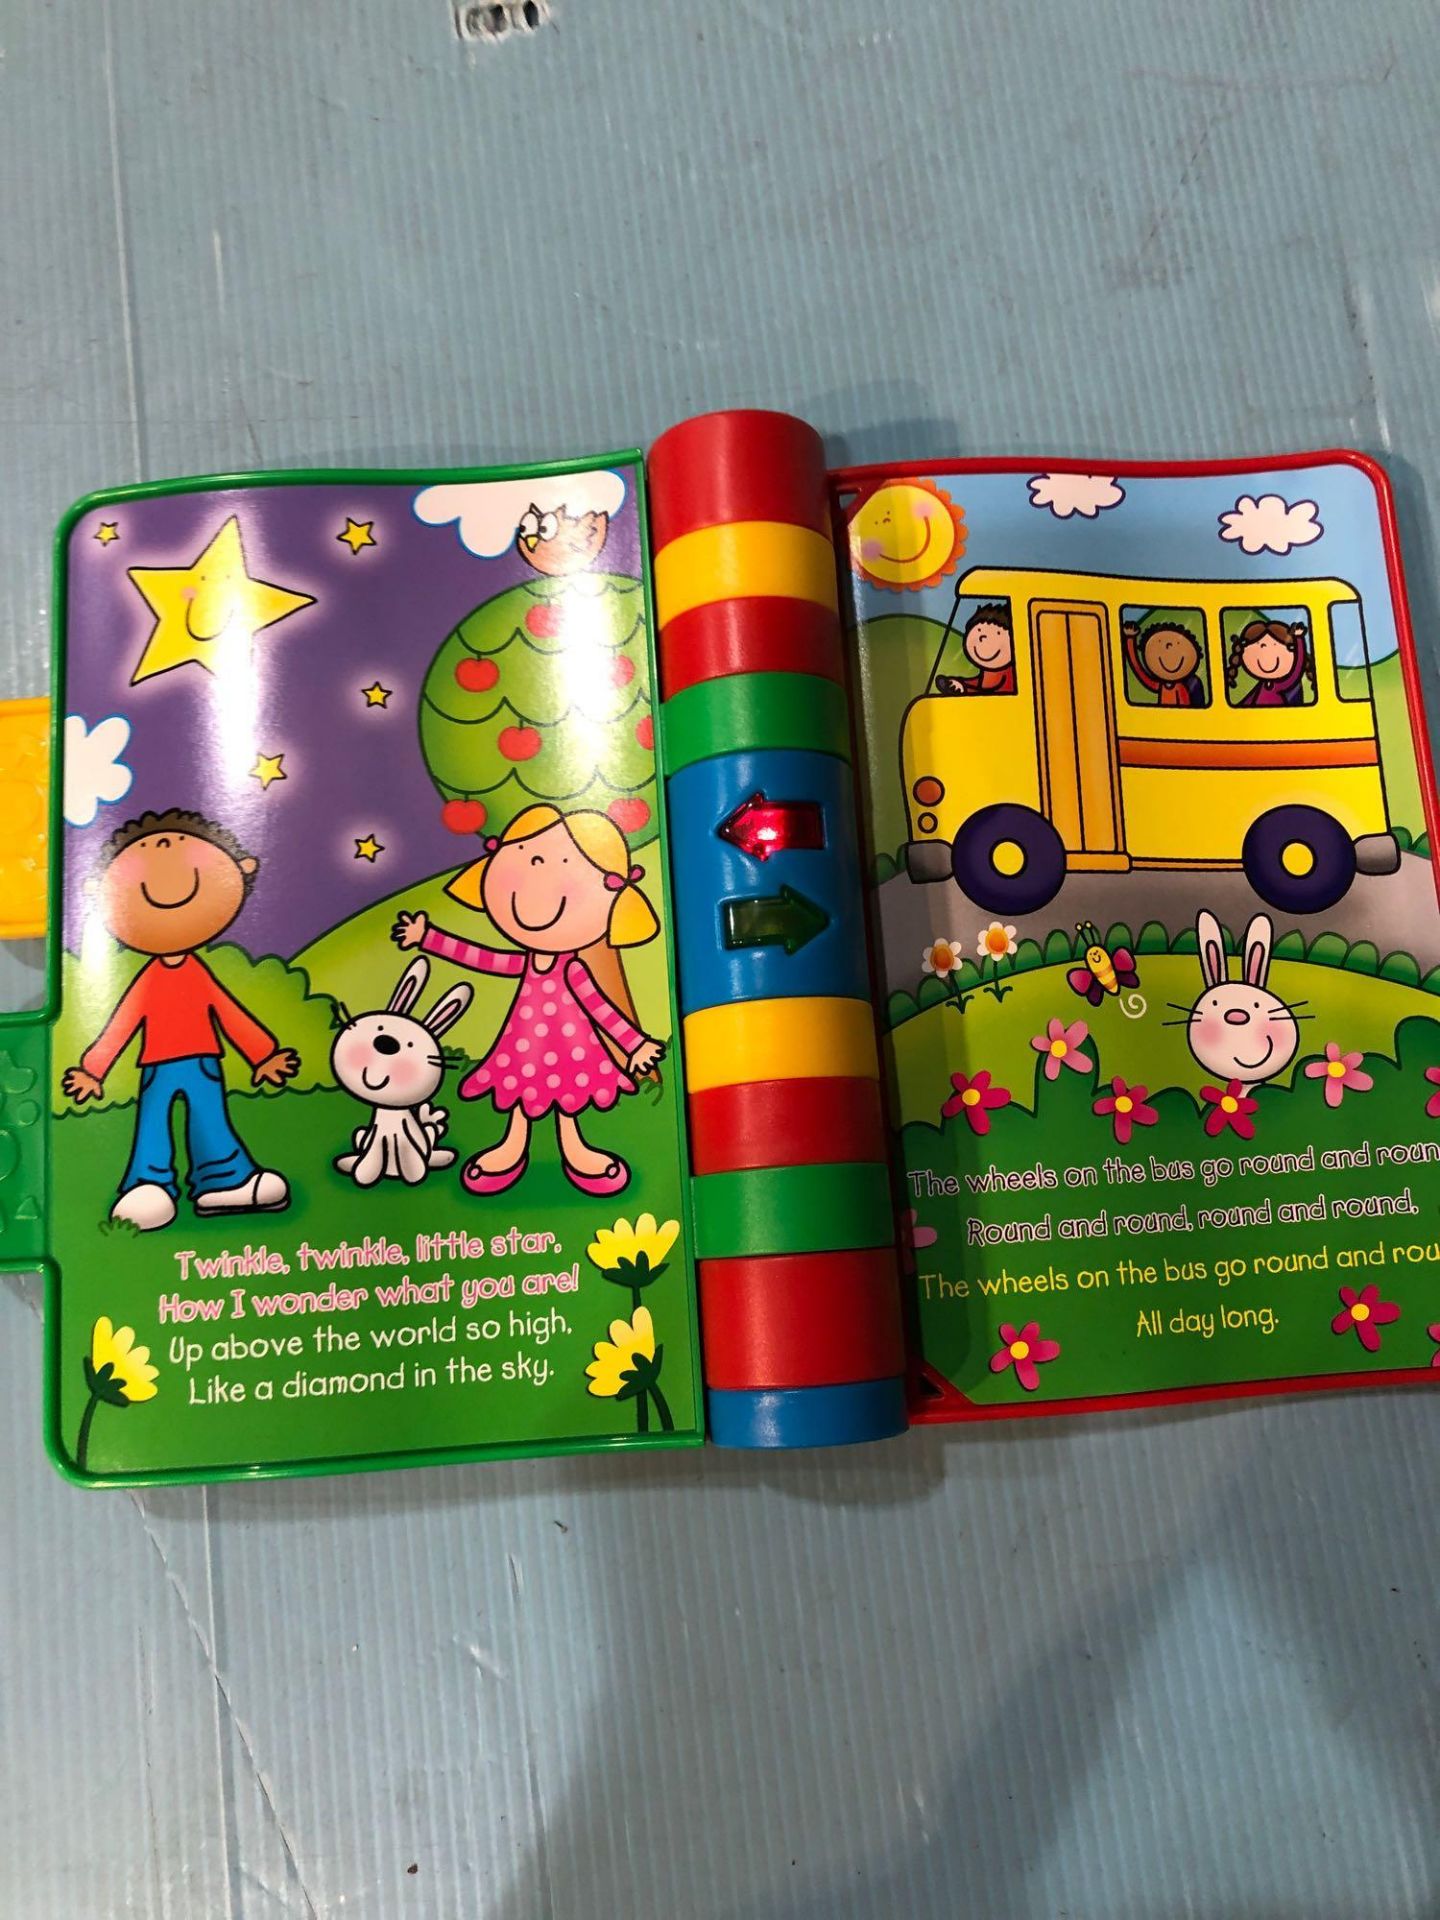 VTech Baby Nursery Rhymes Book - Multi-Colour - £9.00 RRP - Image 5 of 7